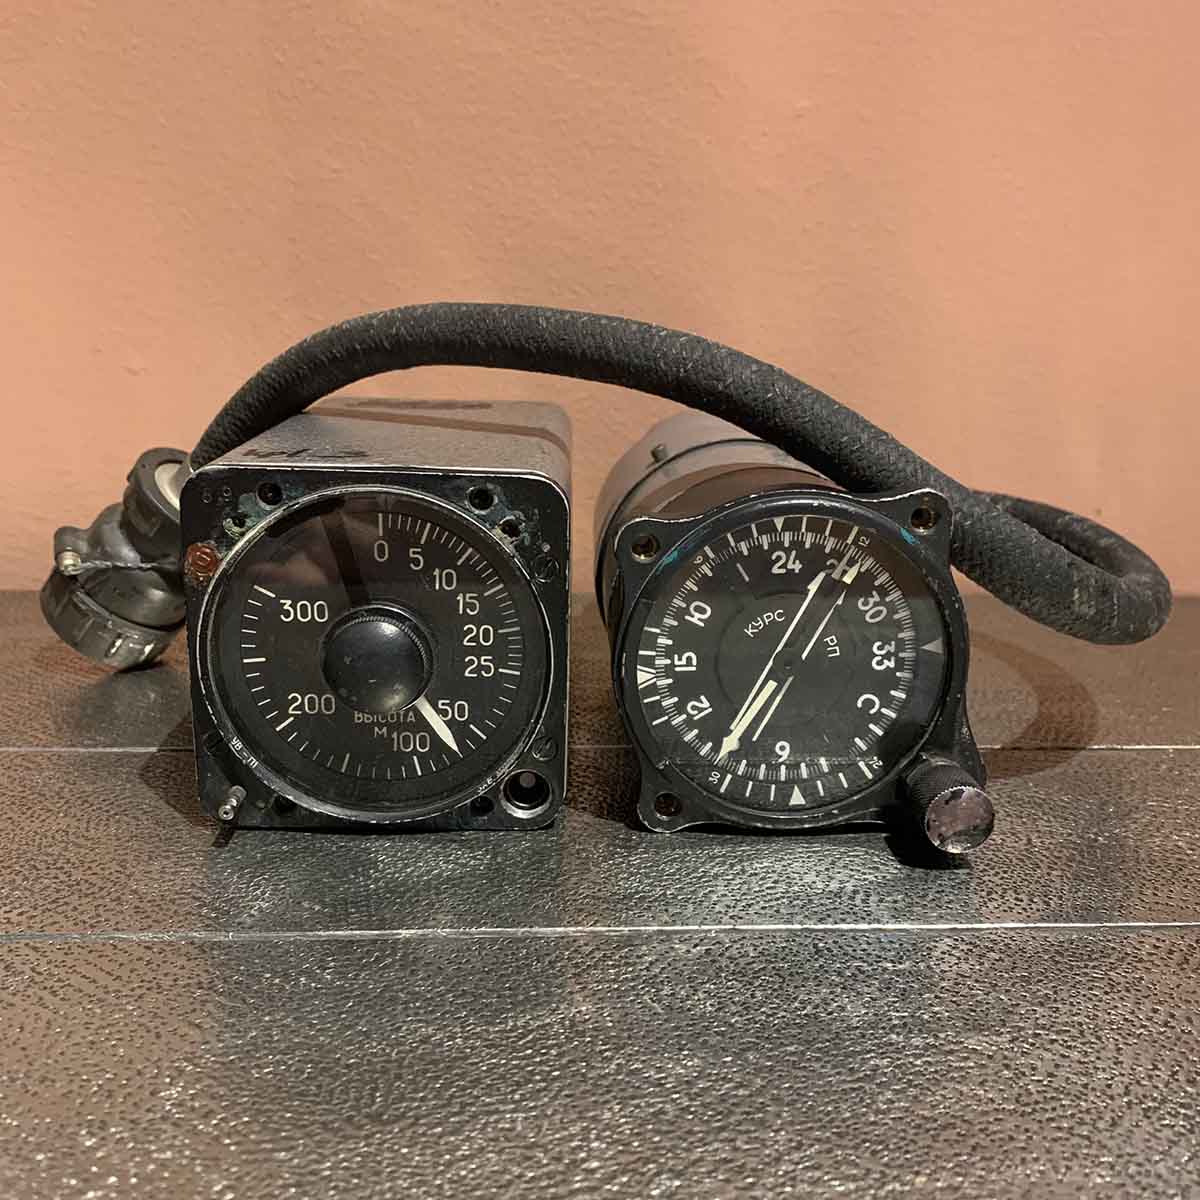 Russian military cockpit instruments for sale.